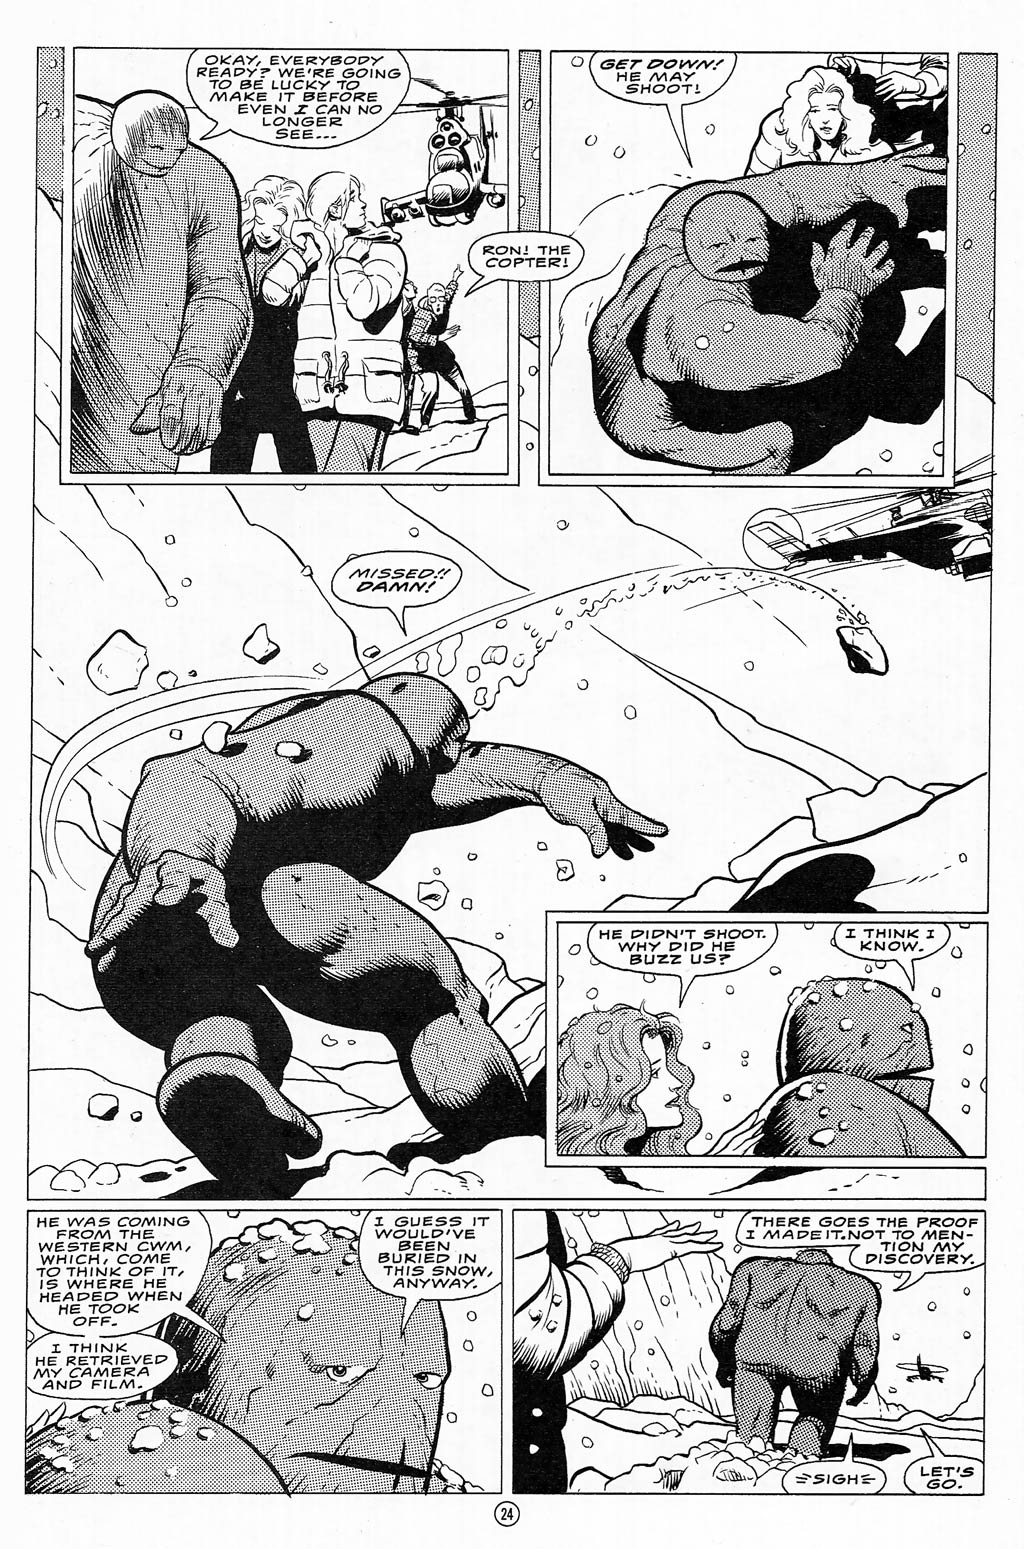 Concrete (1987) issue 9 - Page 24